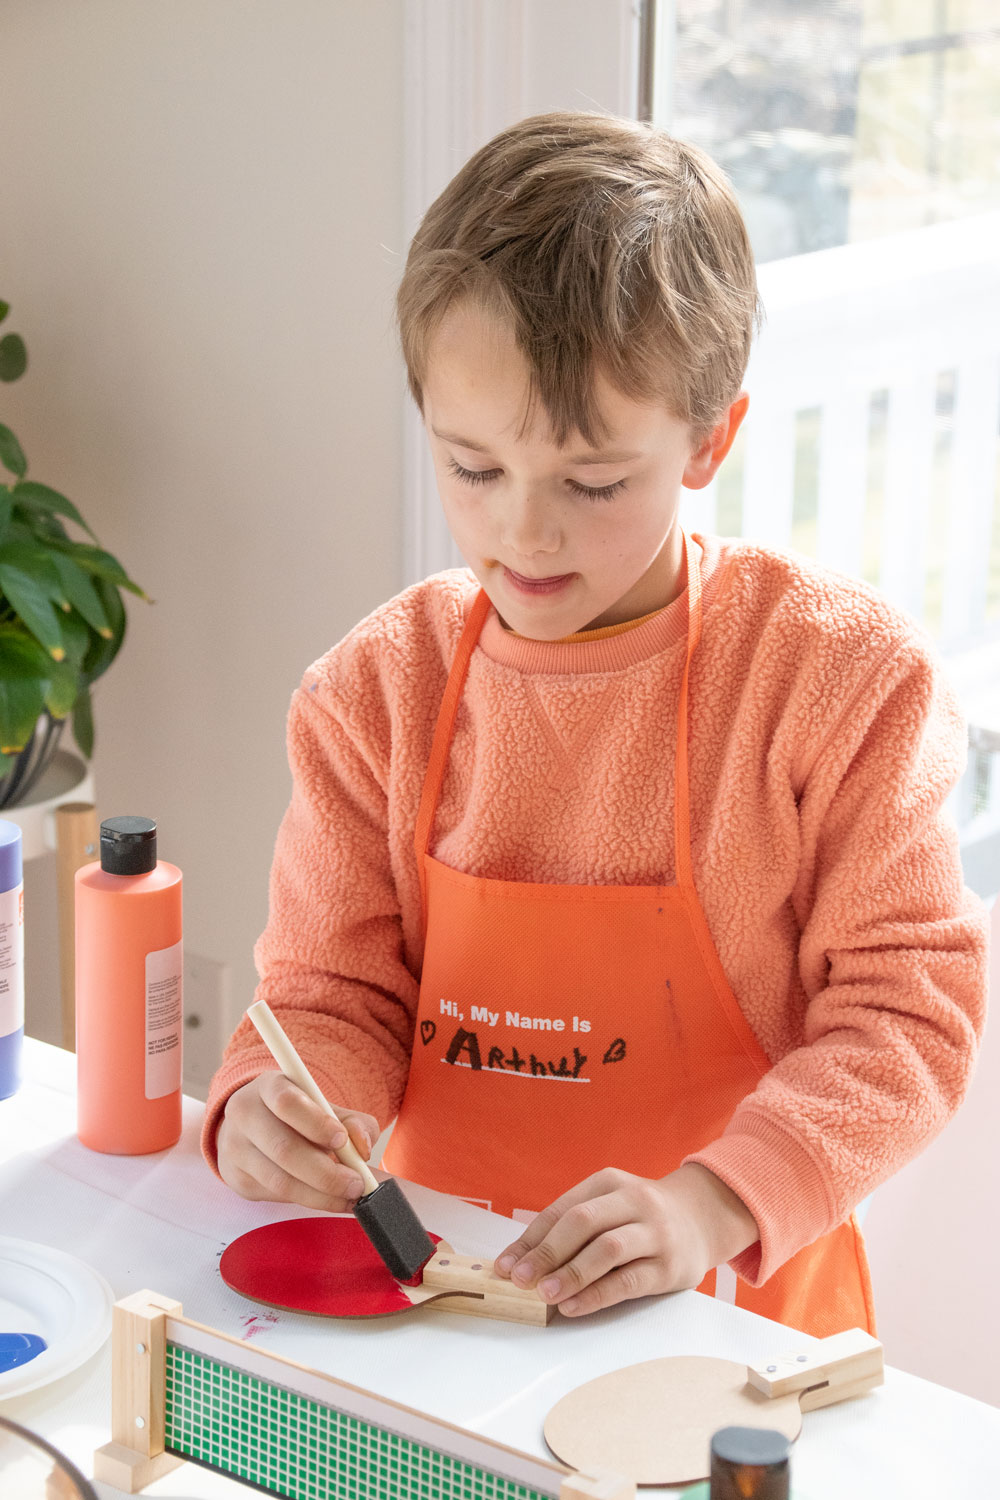 A boy painting a table tennis mallet with red paint.